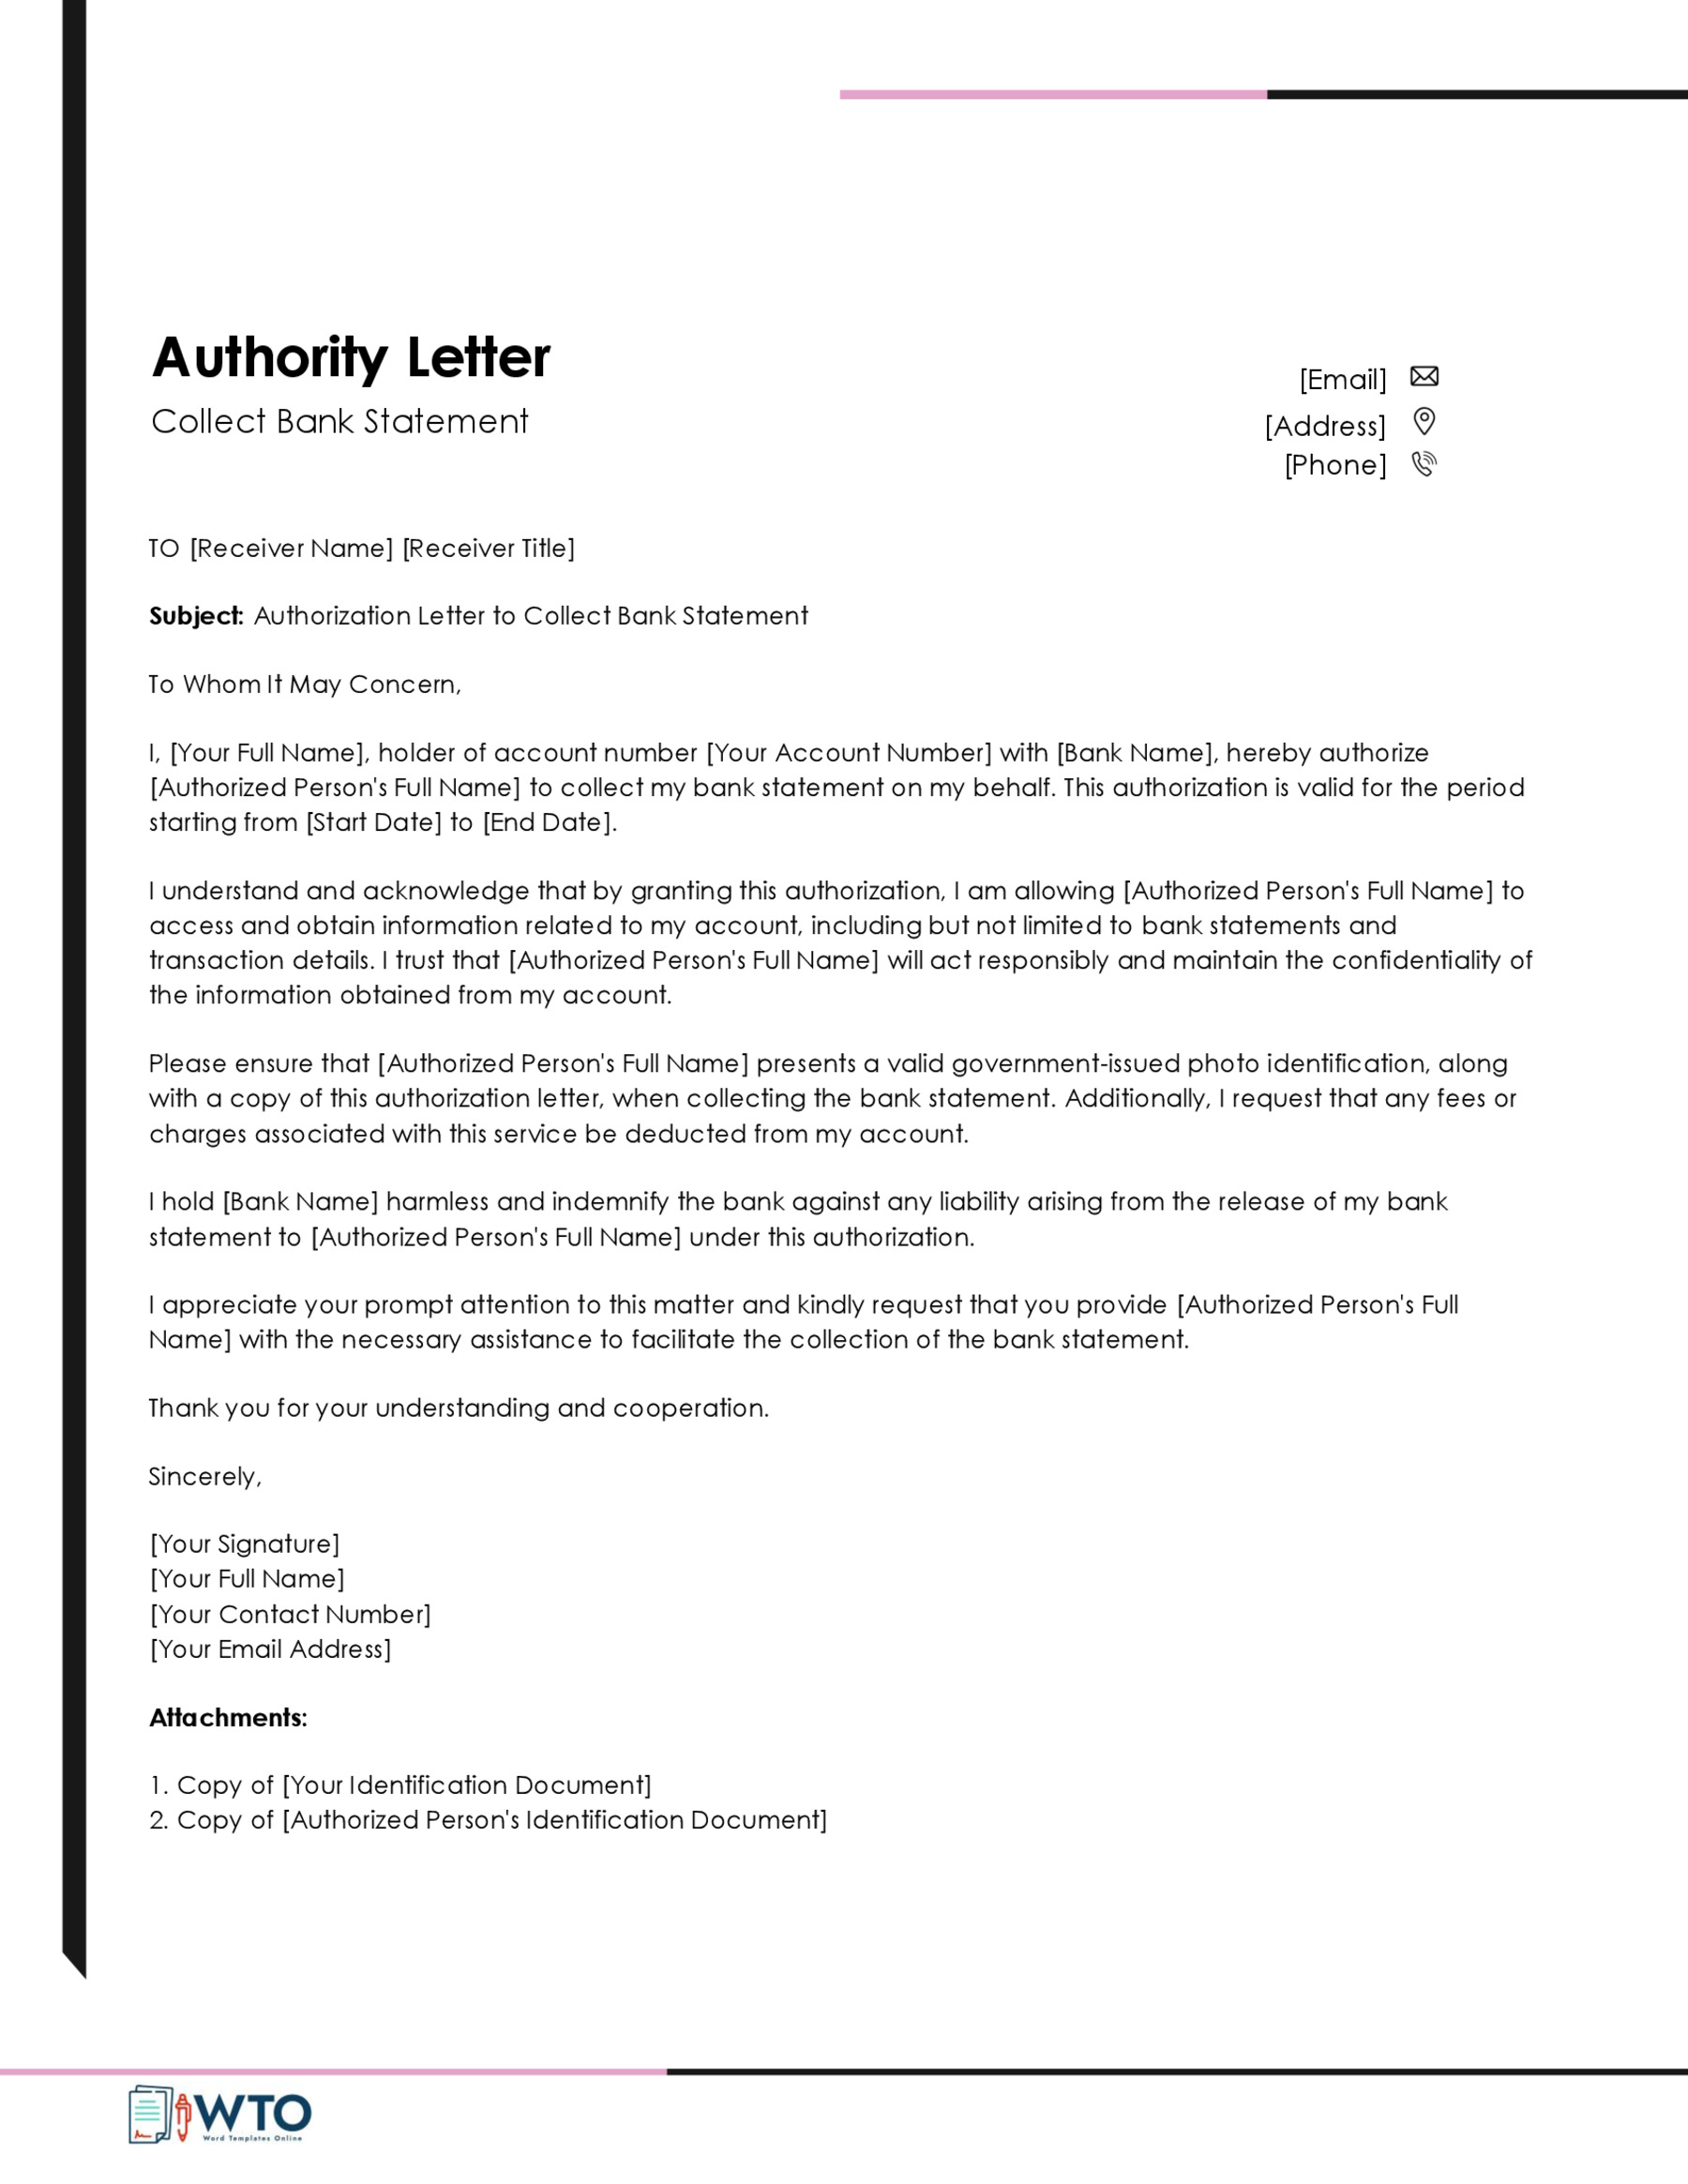 Authorization Letter to Collect Bank Statement Template-Free download in ms word